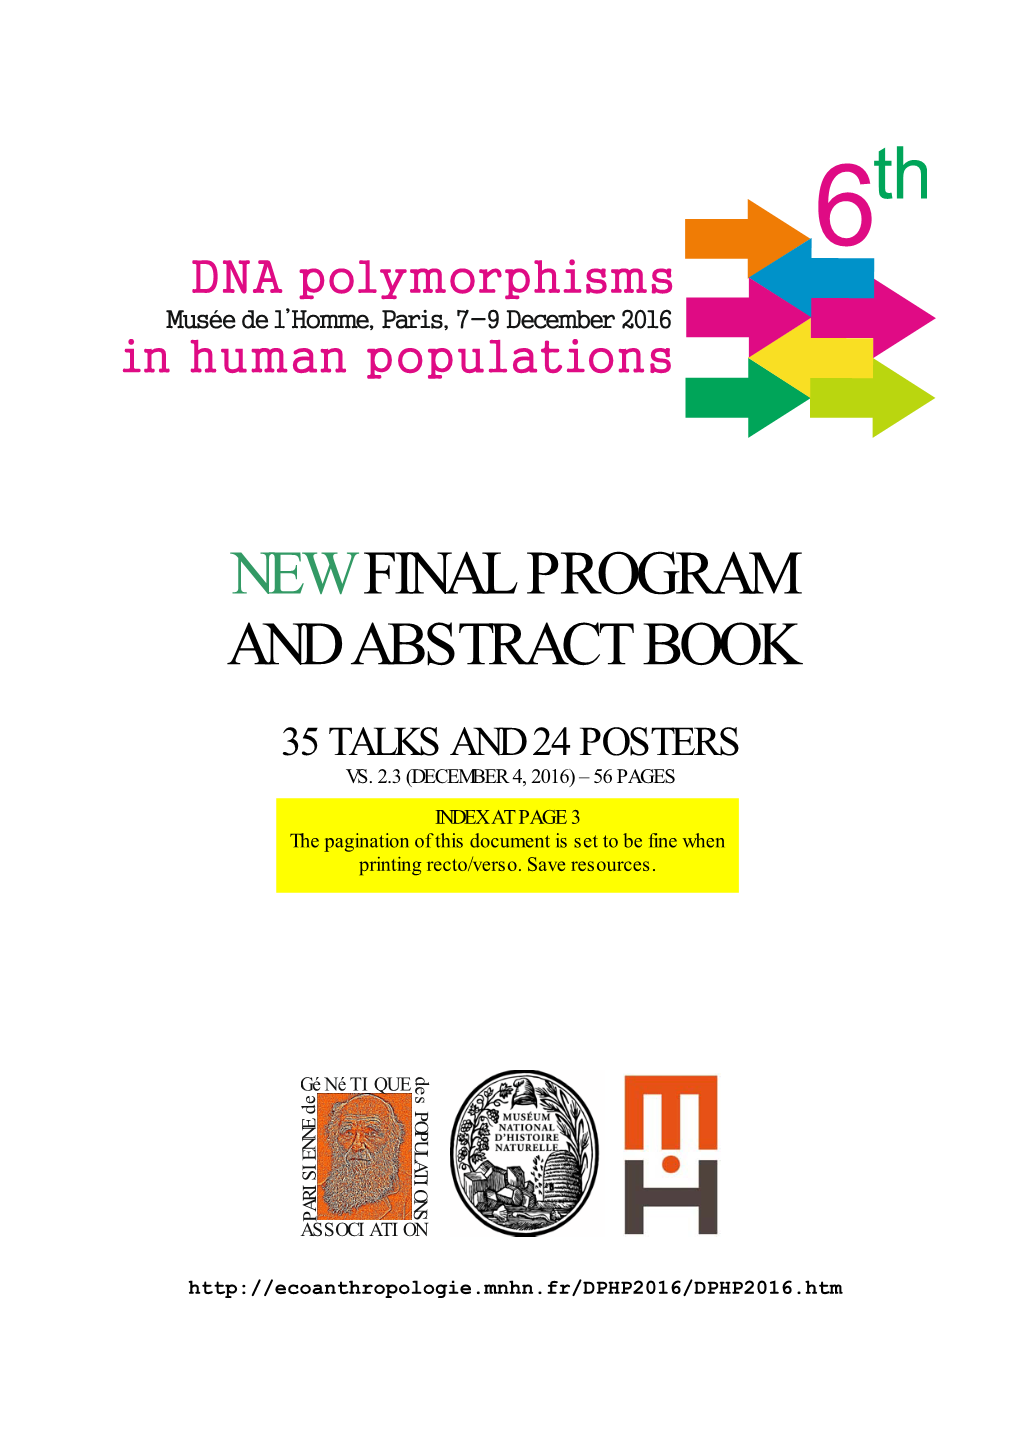 Final Program and Abstract Book Here (Pdf)